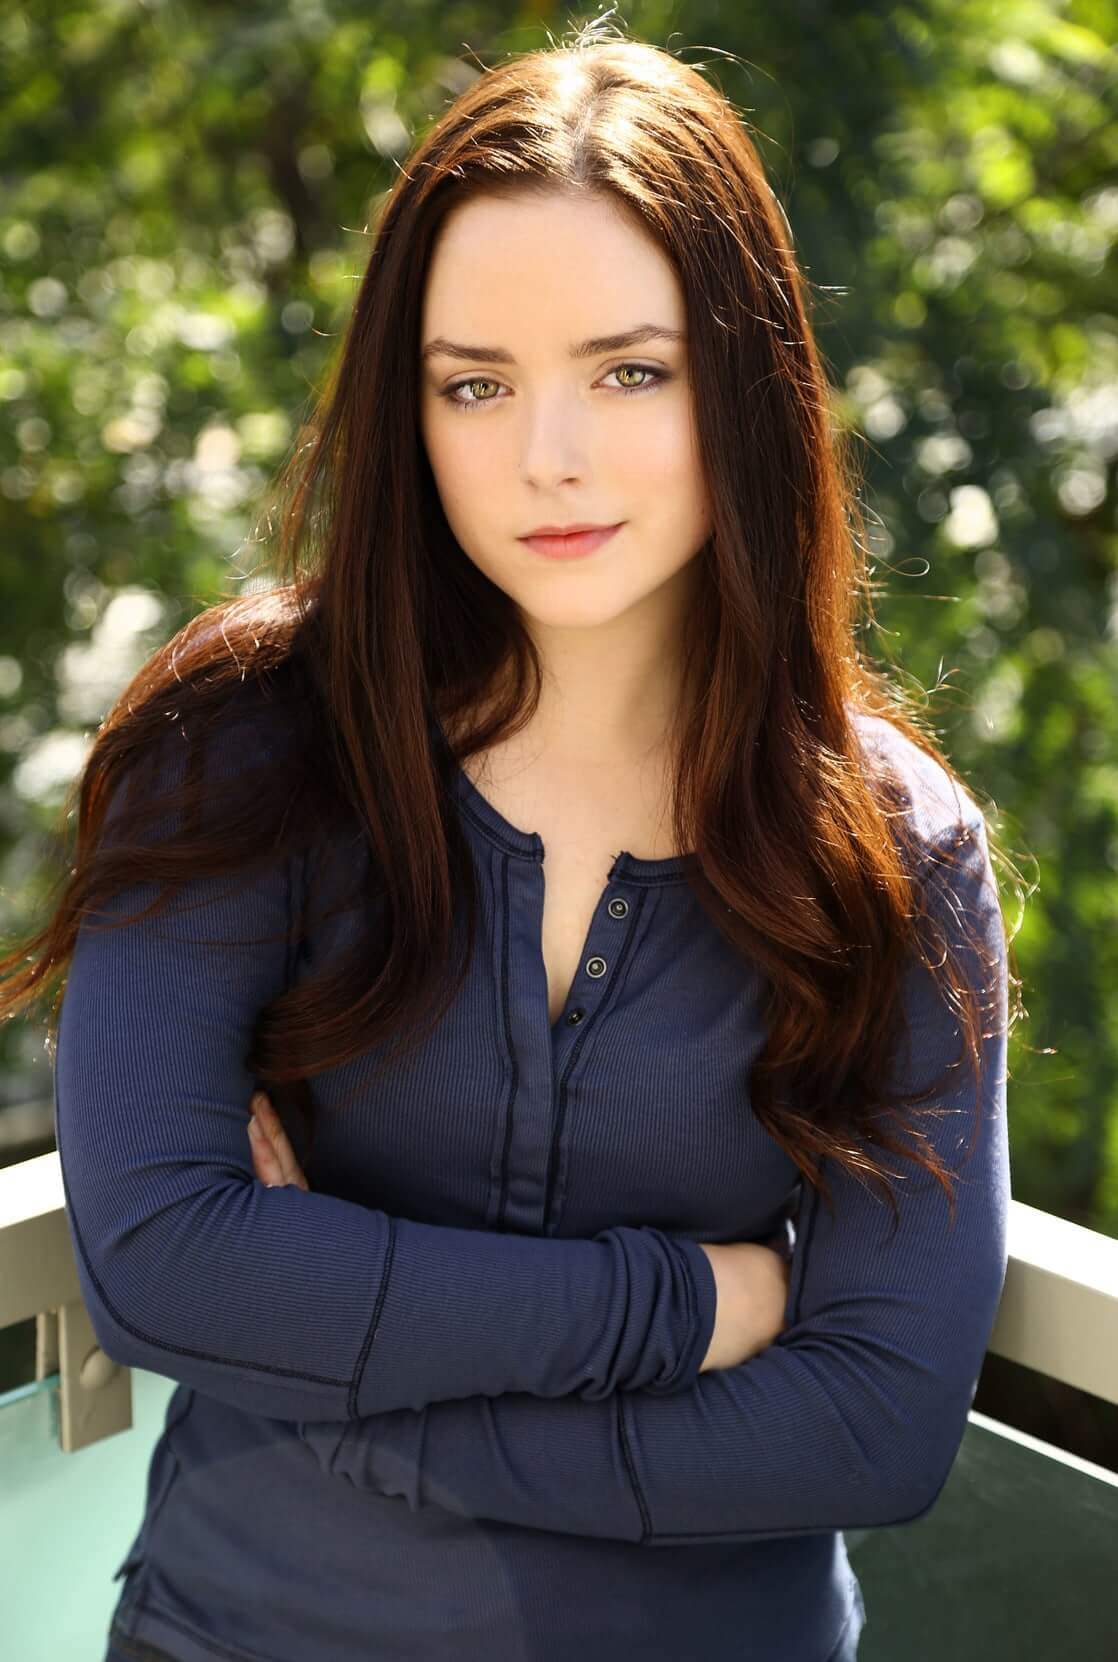 Hot Picture Of Madison Davenport Are Going To Cheer You Up